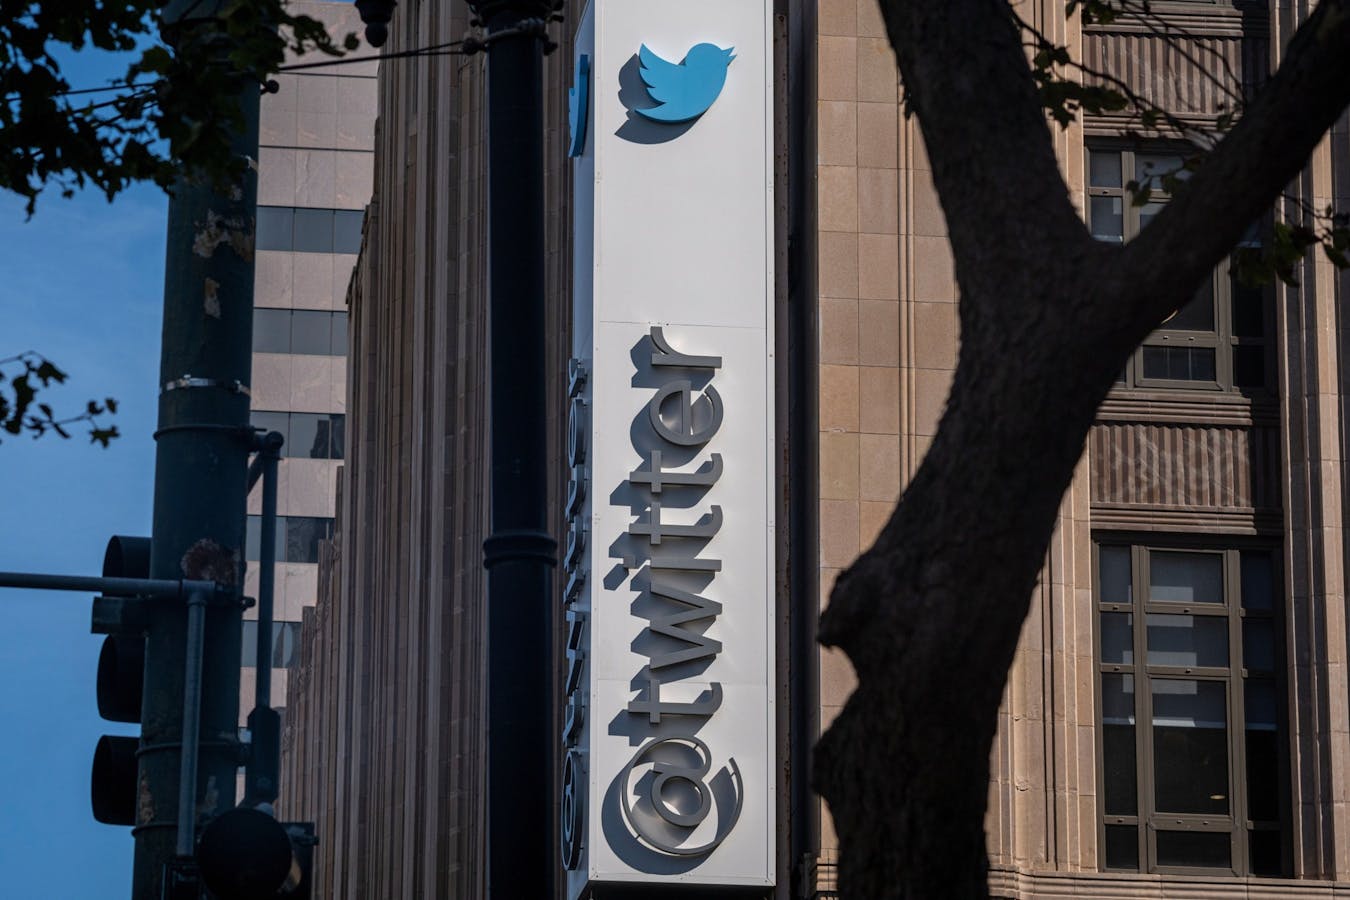 Twitter offices in San Francisco. Photo by Bloomberg.